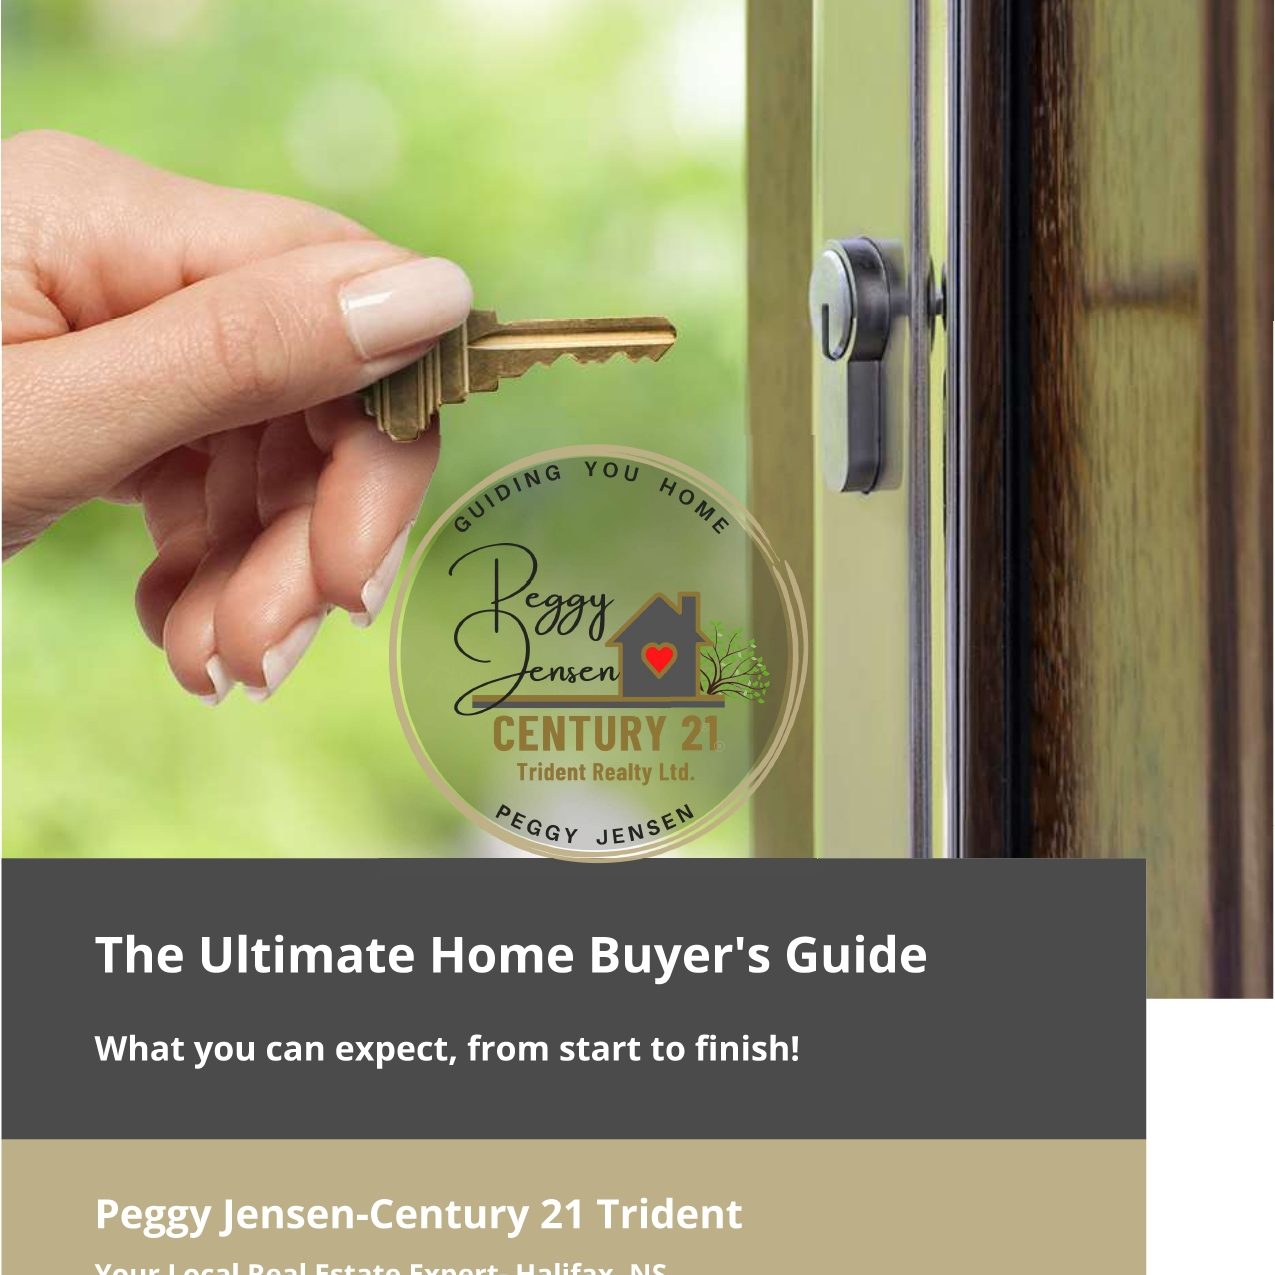 Home Buyer's Guide-Peggy Jensen